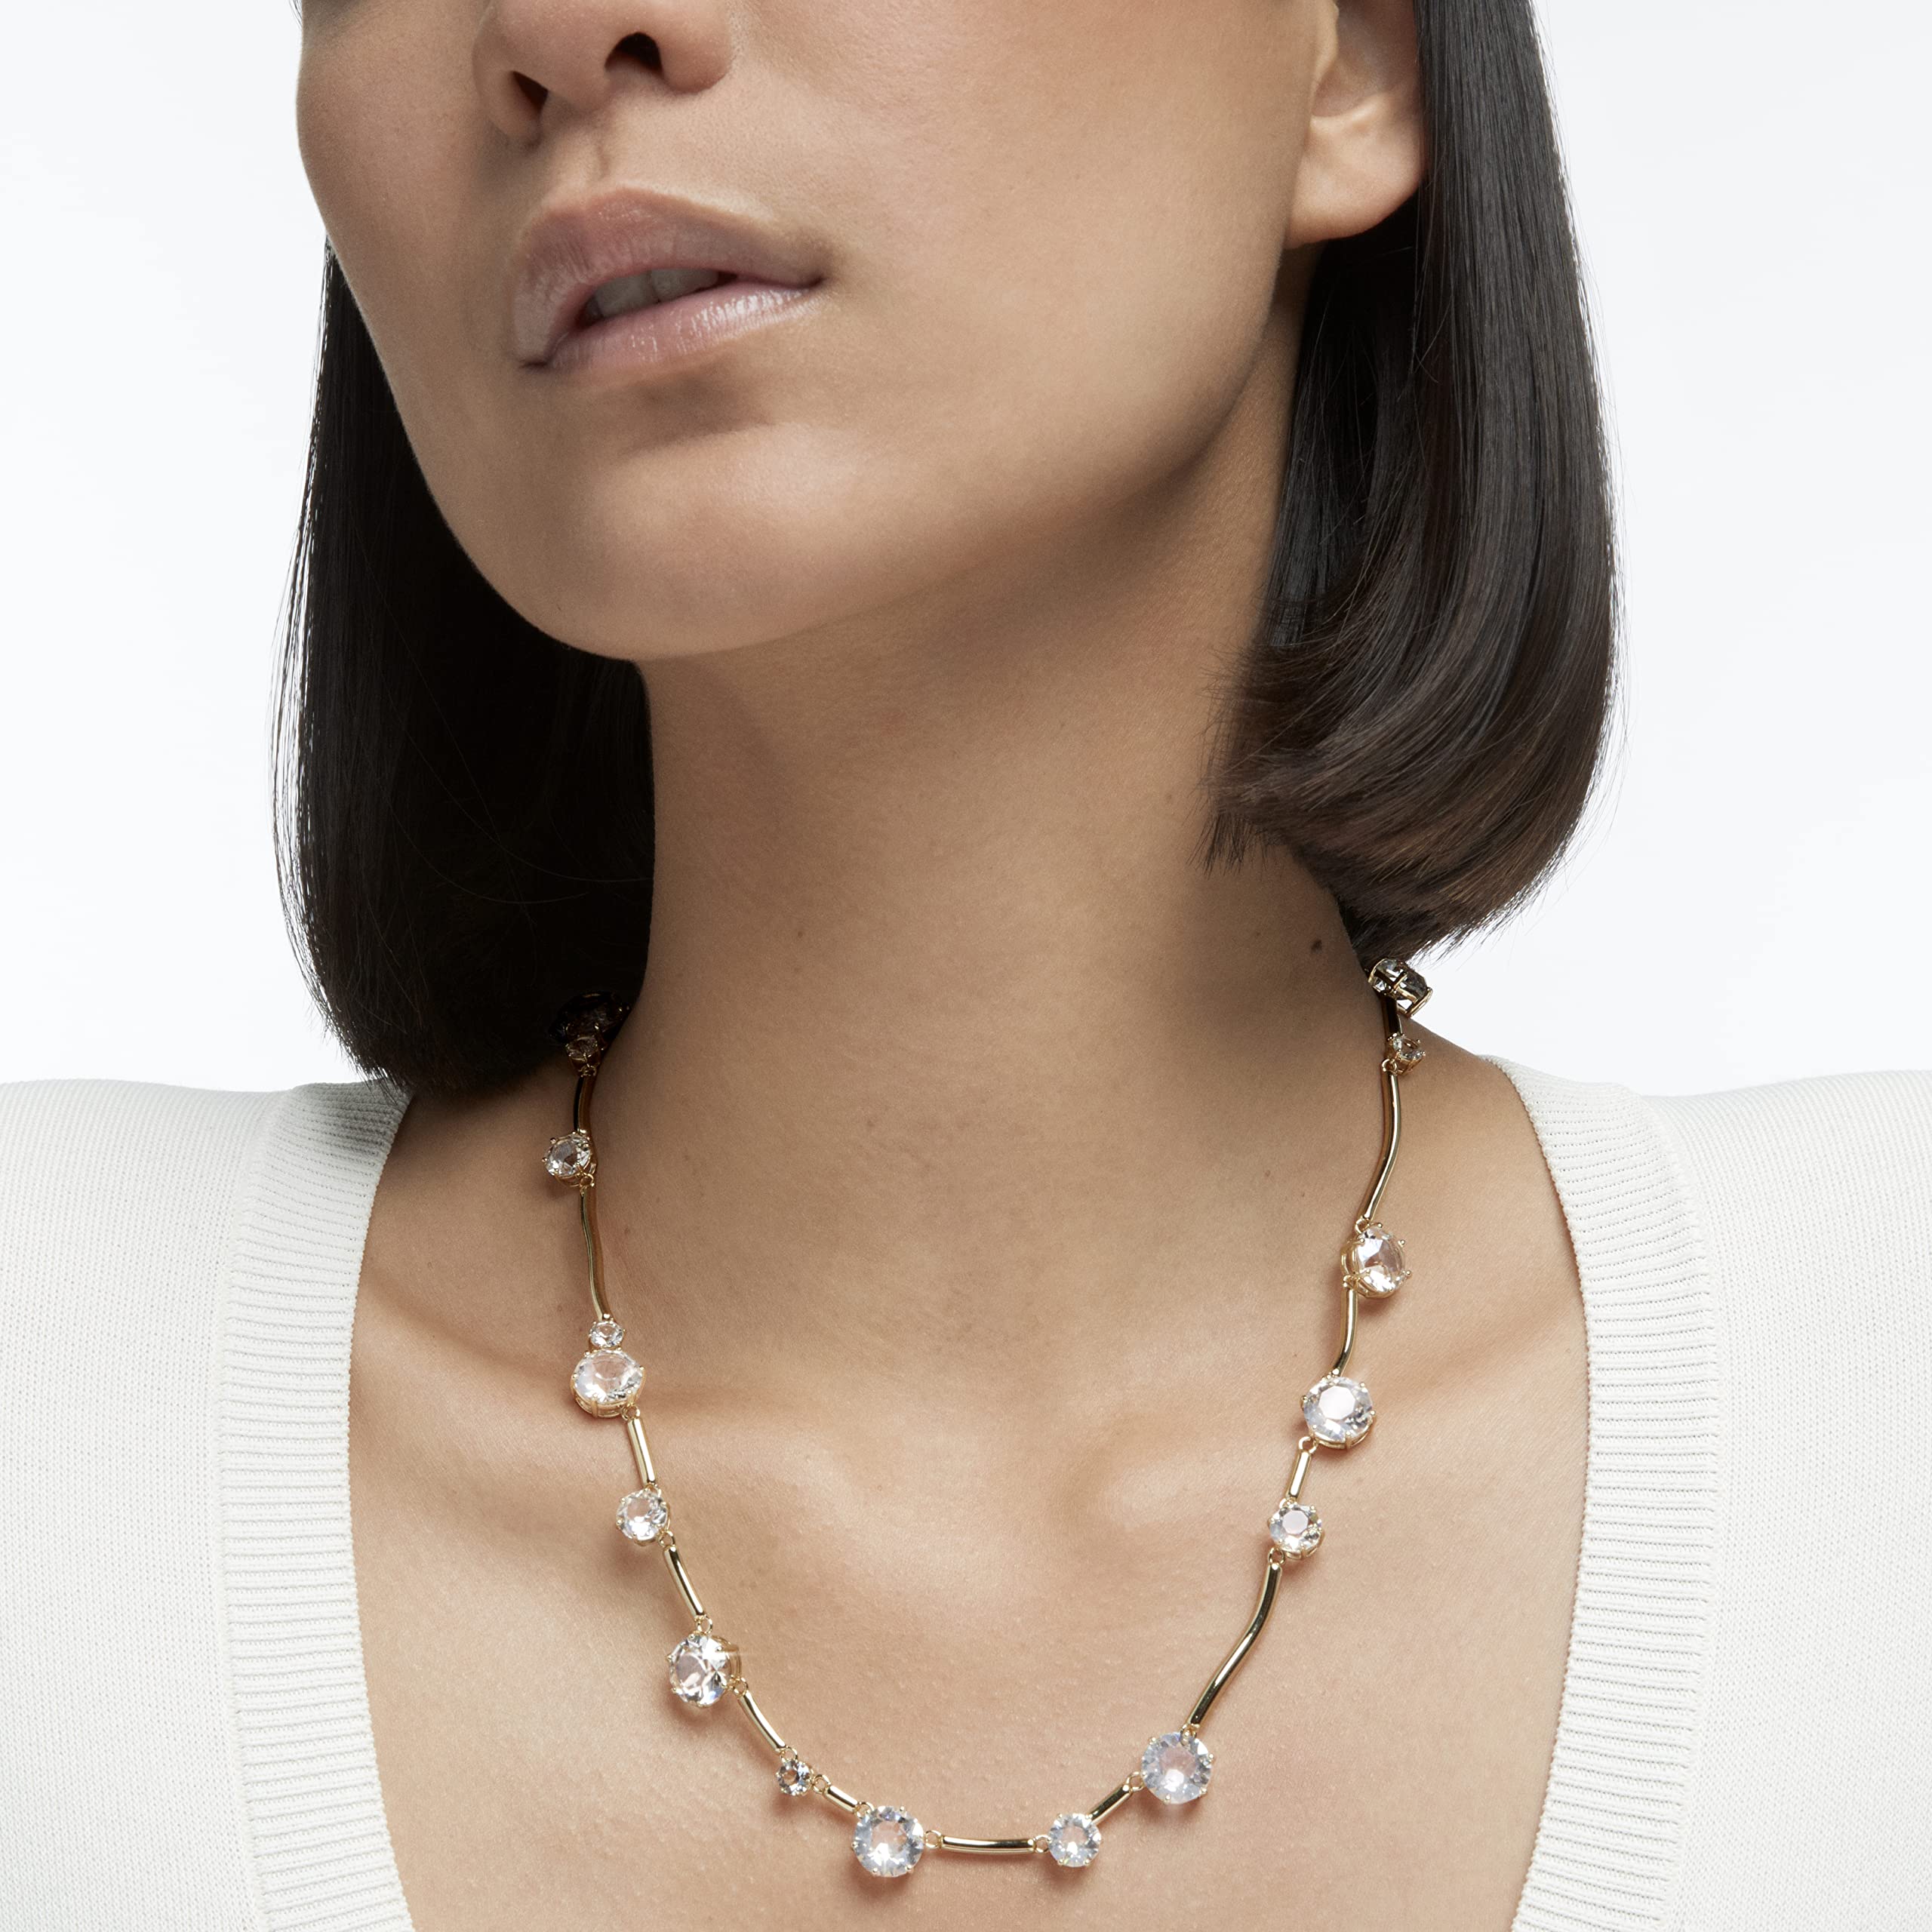 SWAROVSKI Constella Necklace Collection with Clear Crystals